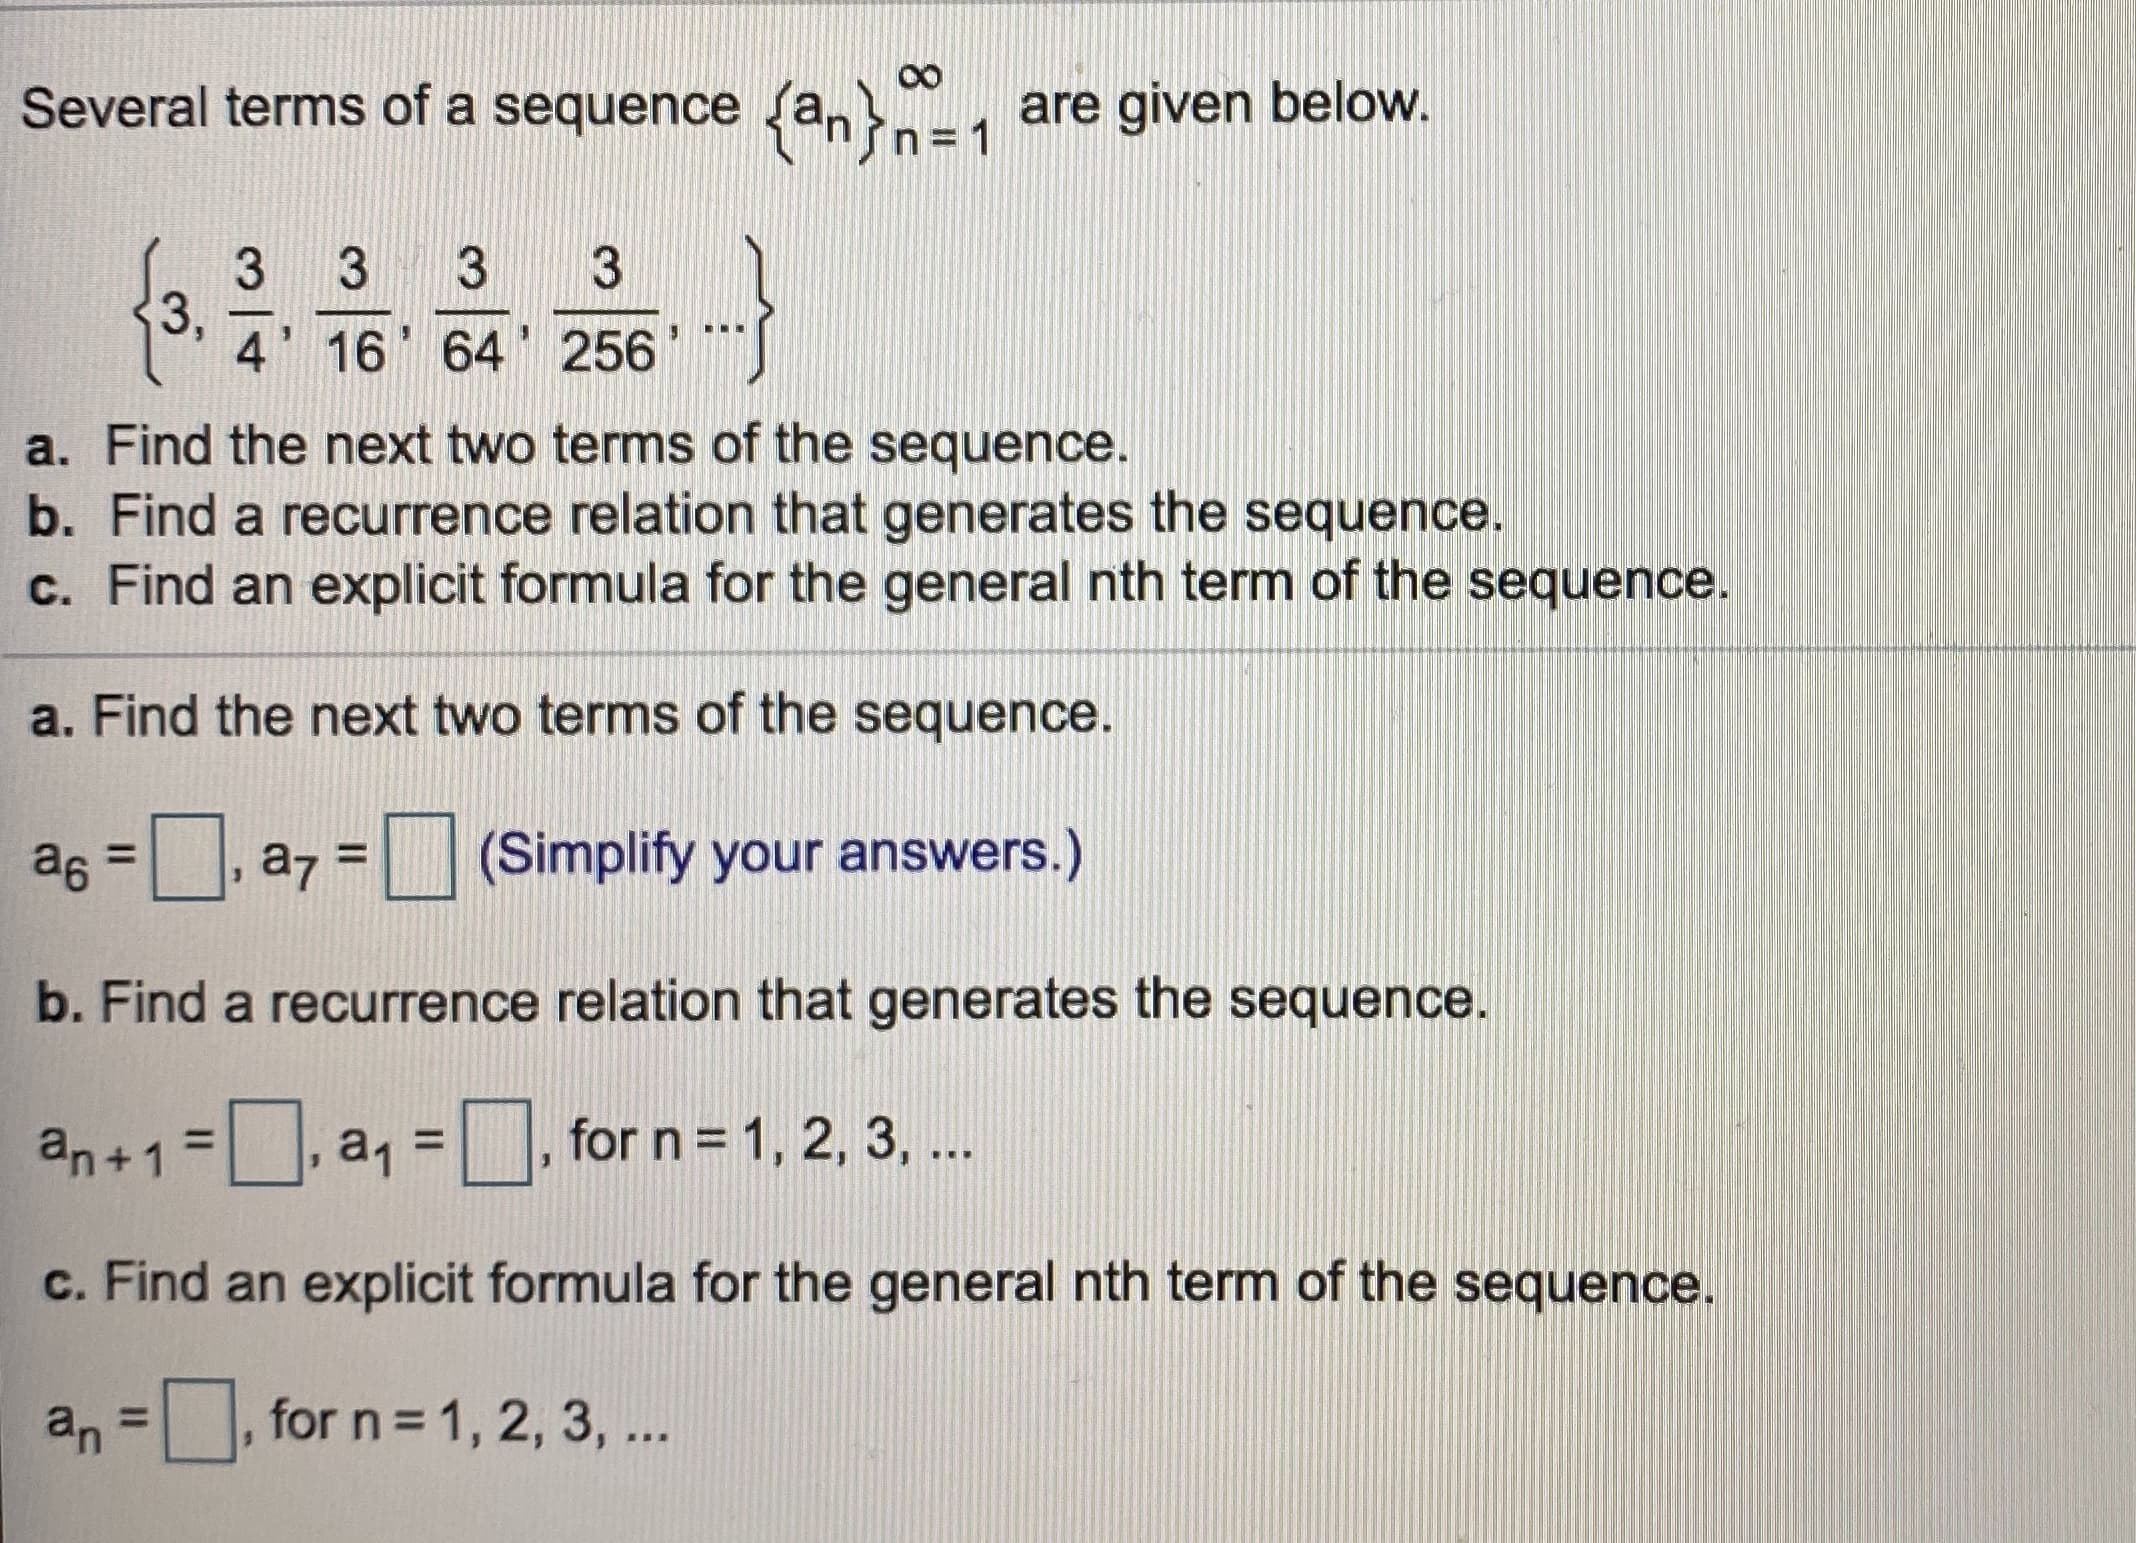 Several terms of a sequence {an}n
are given below.
= 1
3
3,
4' 16 64 256
a. Find the next two terms of the sequence.
b. Find a recurrence relation that generates the sequence.
c. Find an explicit formula for the general nth term of the sequence.
